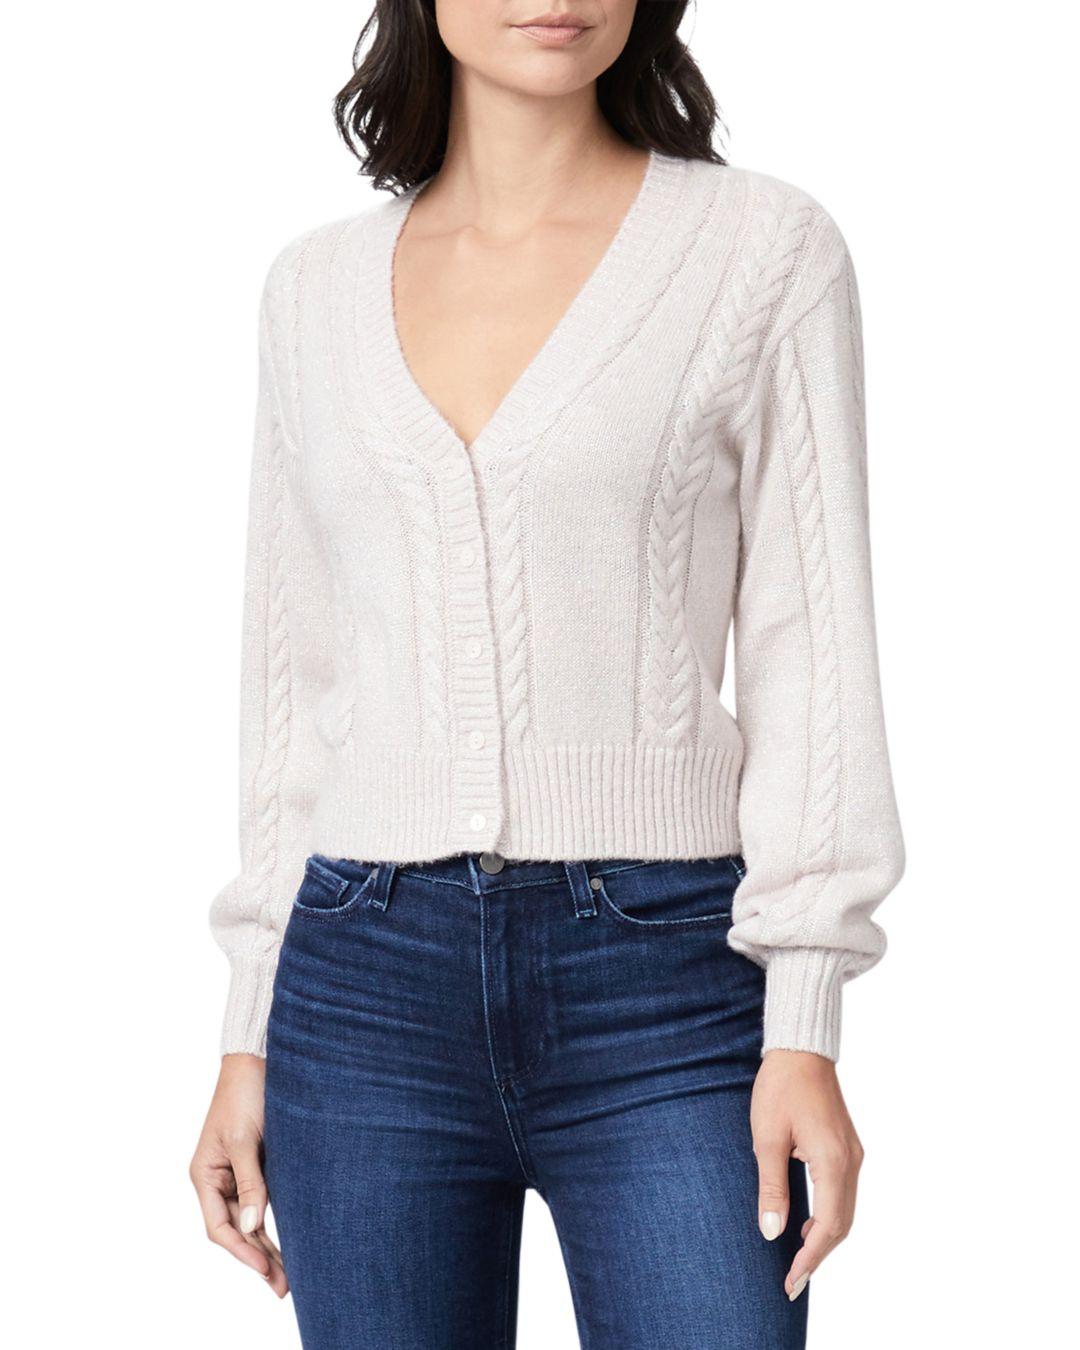 PAIGE Sofie Cable Knit Cardigan Sweater in White | Lyst